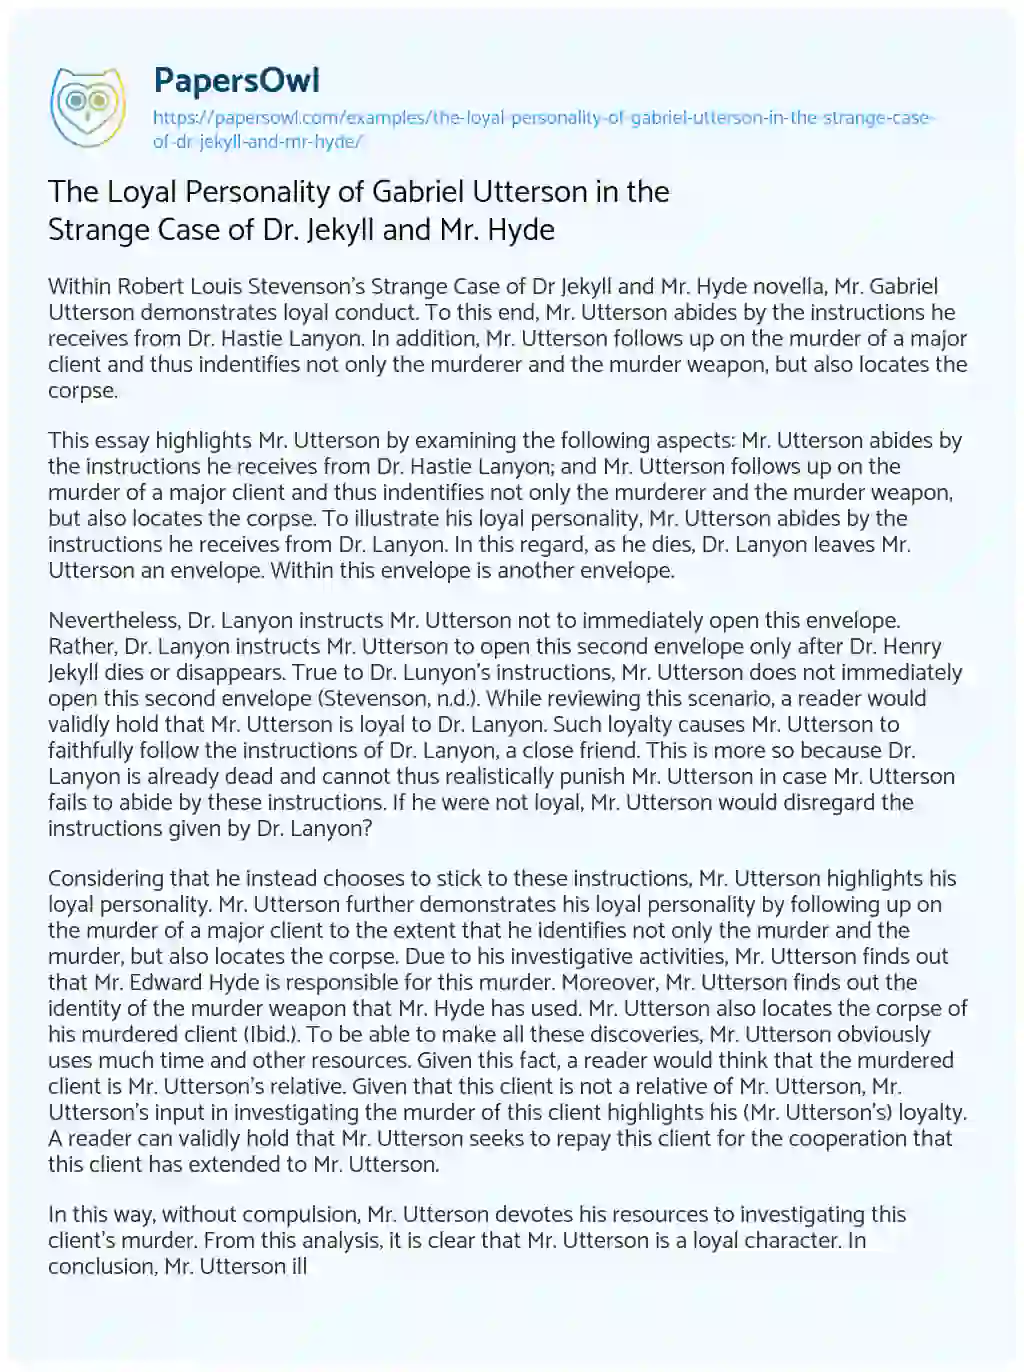 Essay on The Loyal Personality of Gabriel Utterson in the Strange Case of Dr. Jekyll and Mr. Hyde